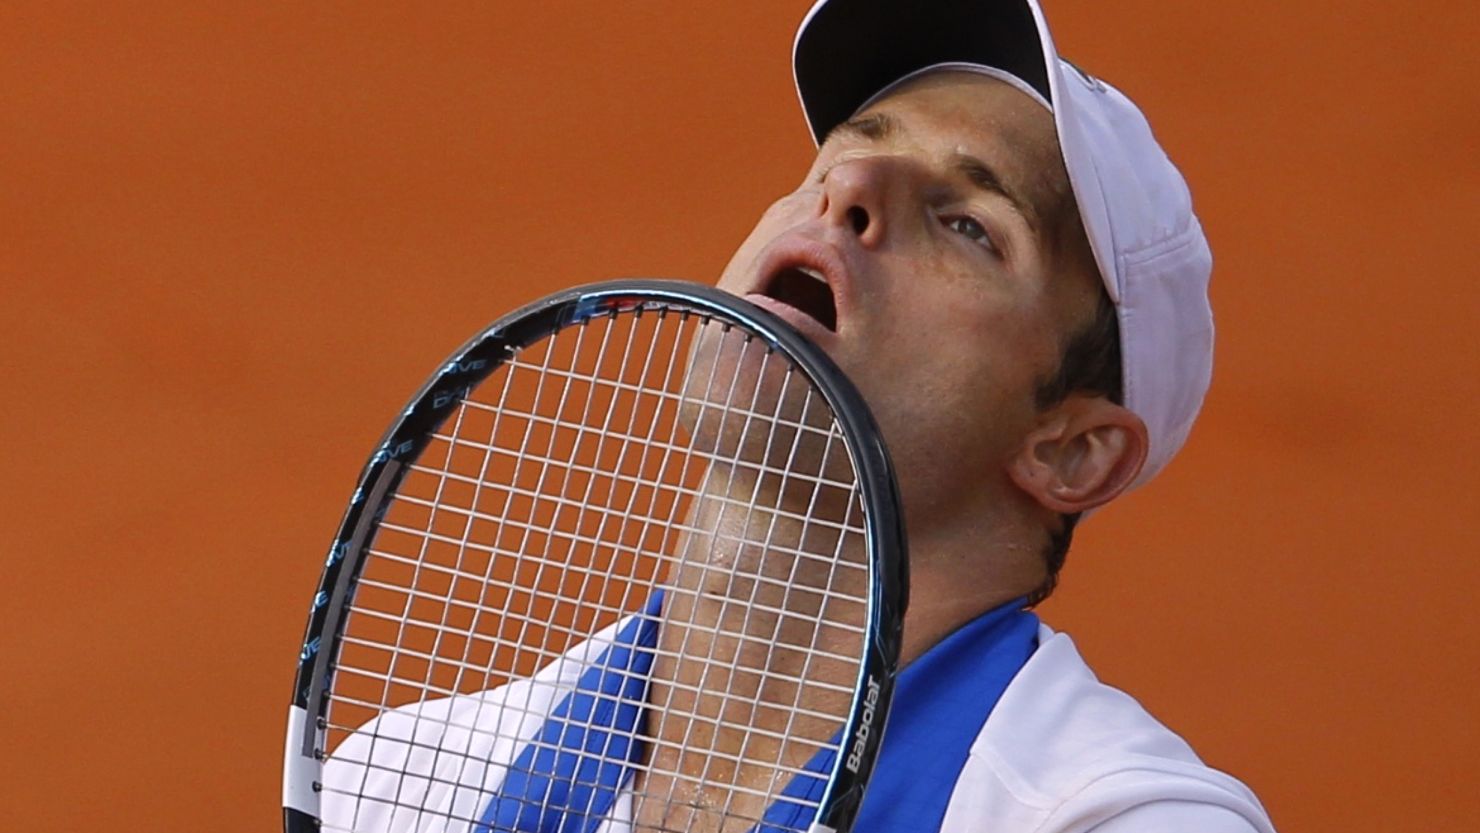 Andy Roddick was left to contemplate another early exit at the French Open as he lost to Nicolas Mahut.